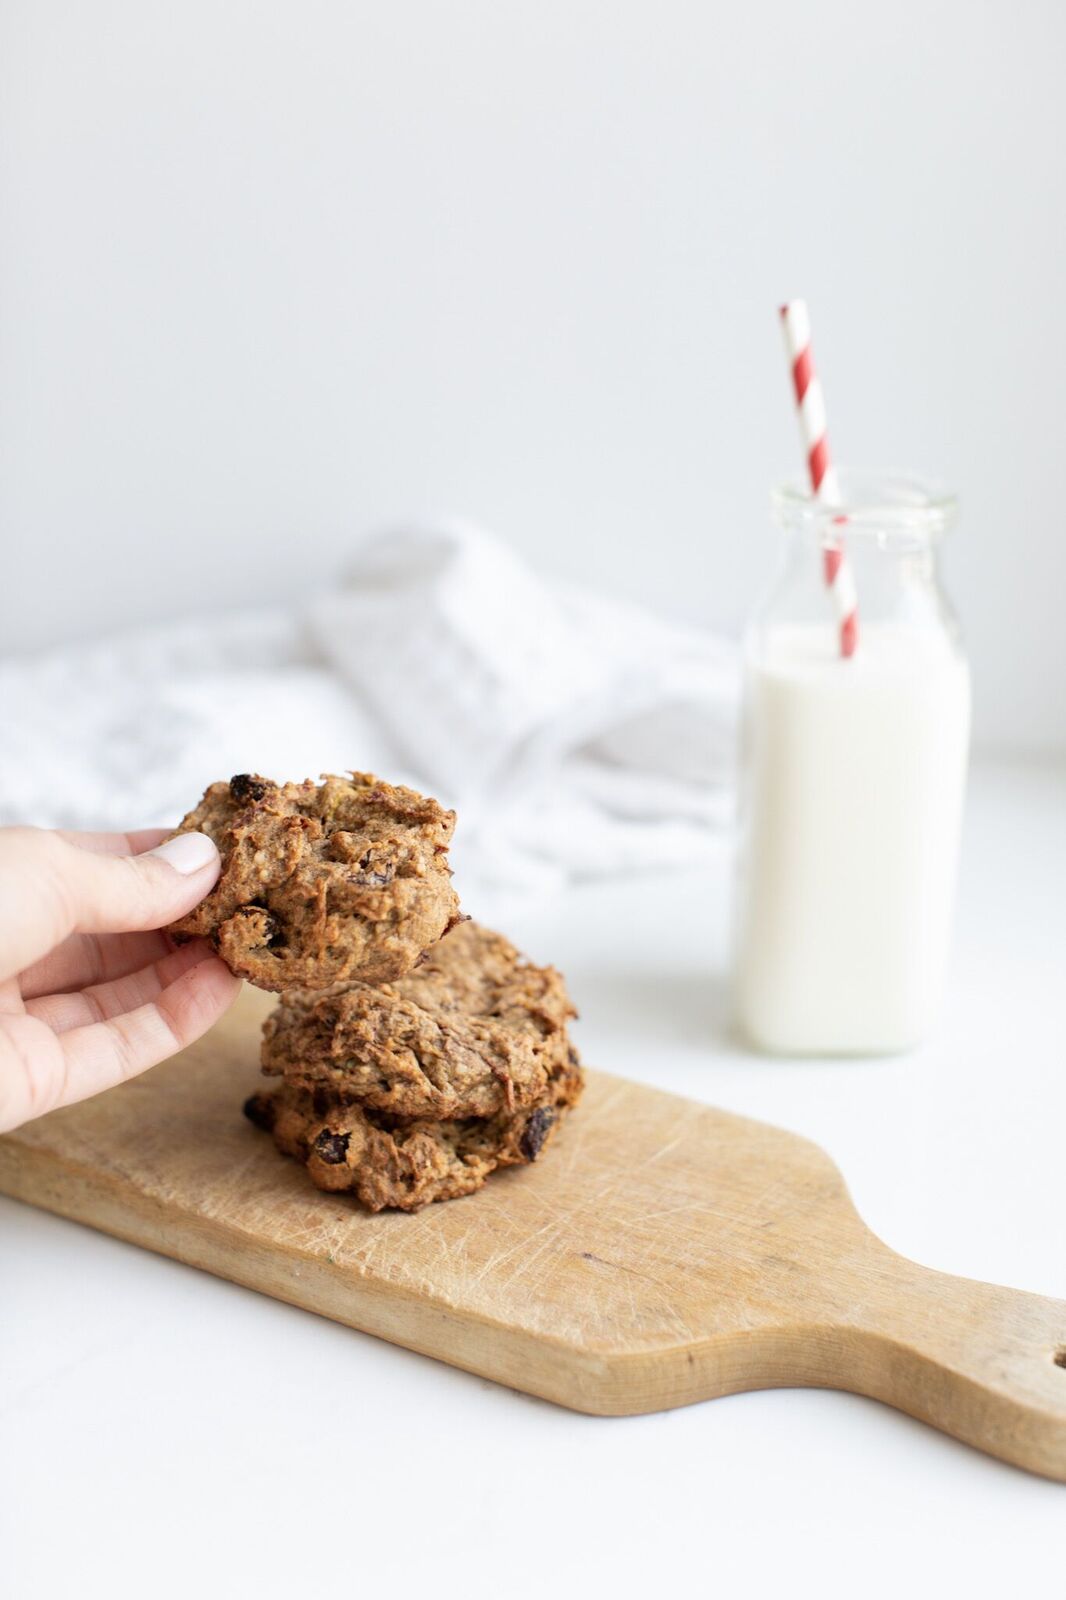 Healthy veggie-packed cookies that are nut free, gluten free and vegan, perfect or school lunches and are so moist and delicious! These freeze beautifully. From the kitchen of Tori Wesszer, Registered Dietitian with Fraiche Nutrition.